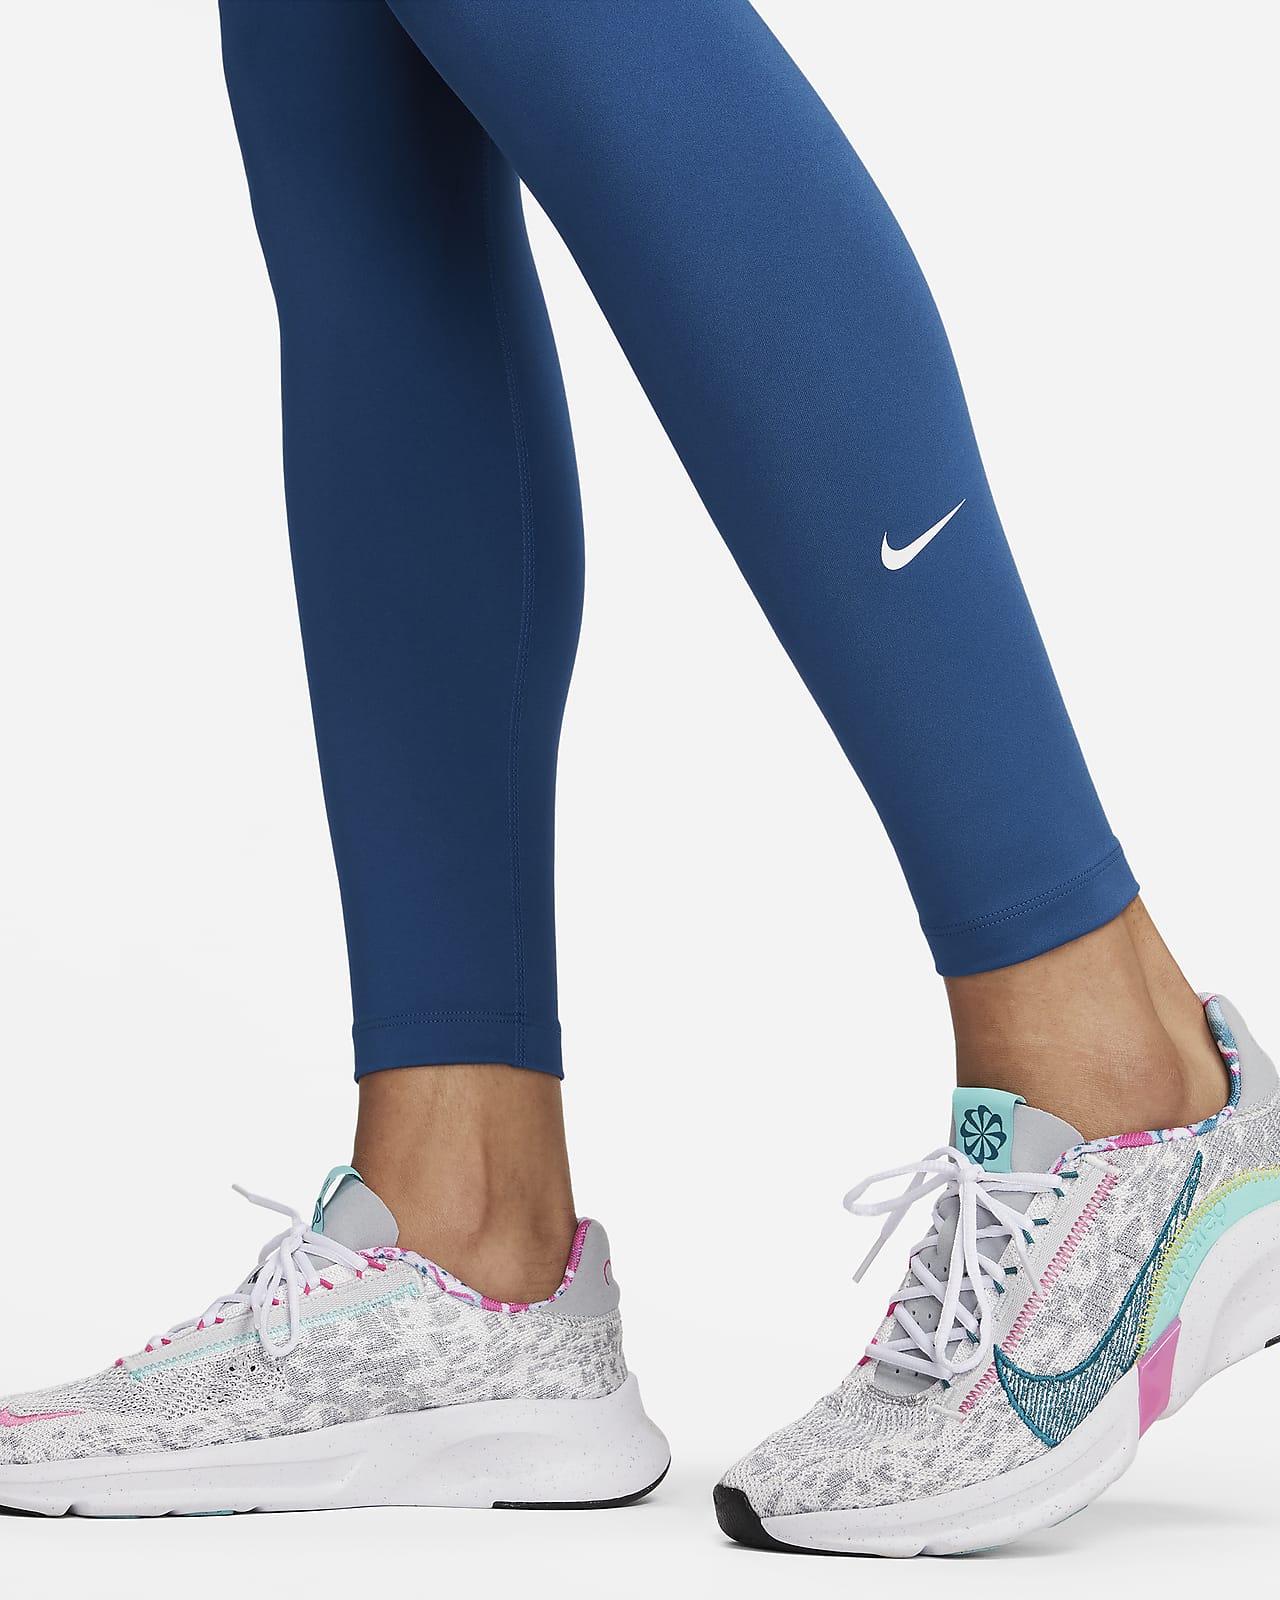 Nike Women's Therma-fit One High-Waisted 7/8 Leggings - Diffused Blue/white  - ShopStyle Activewear Pants